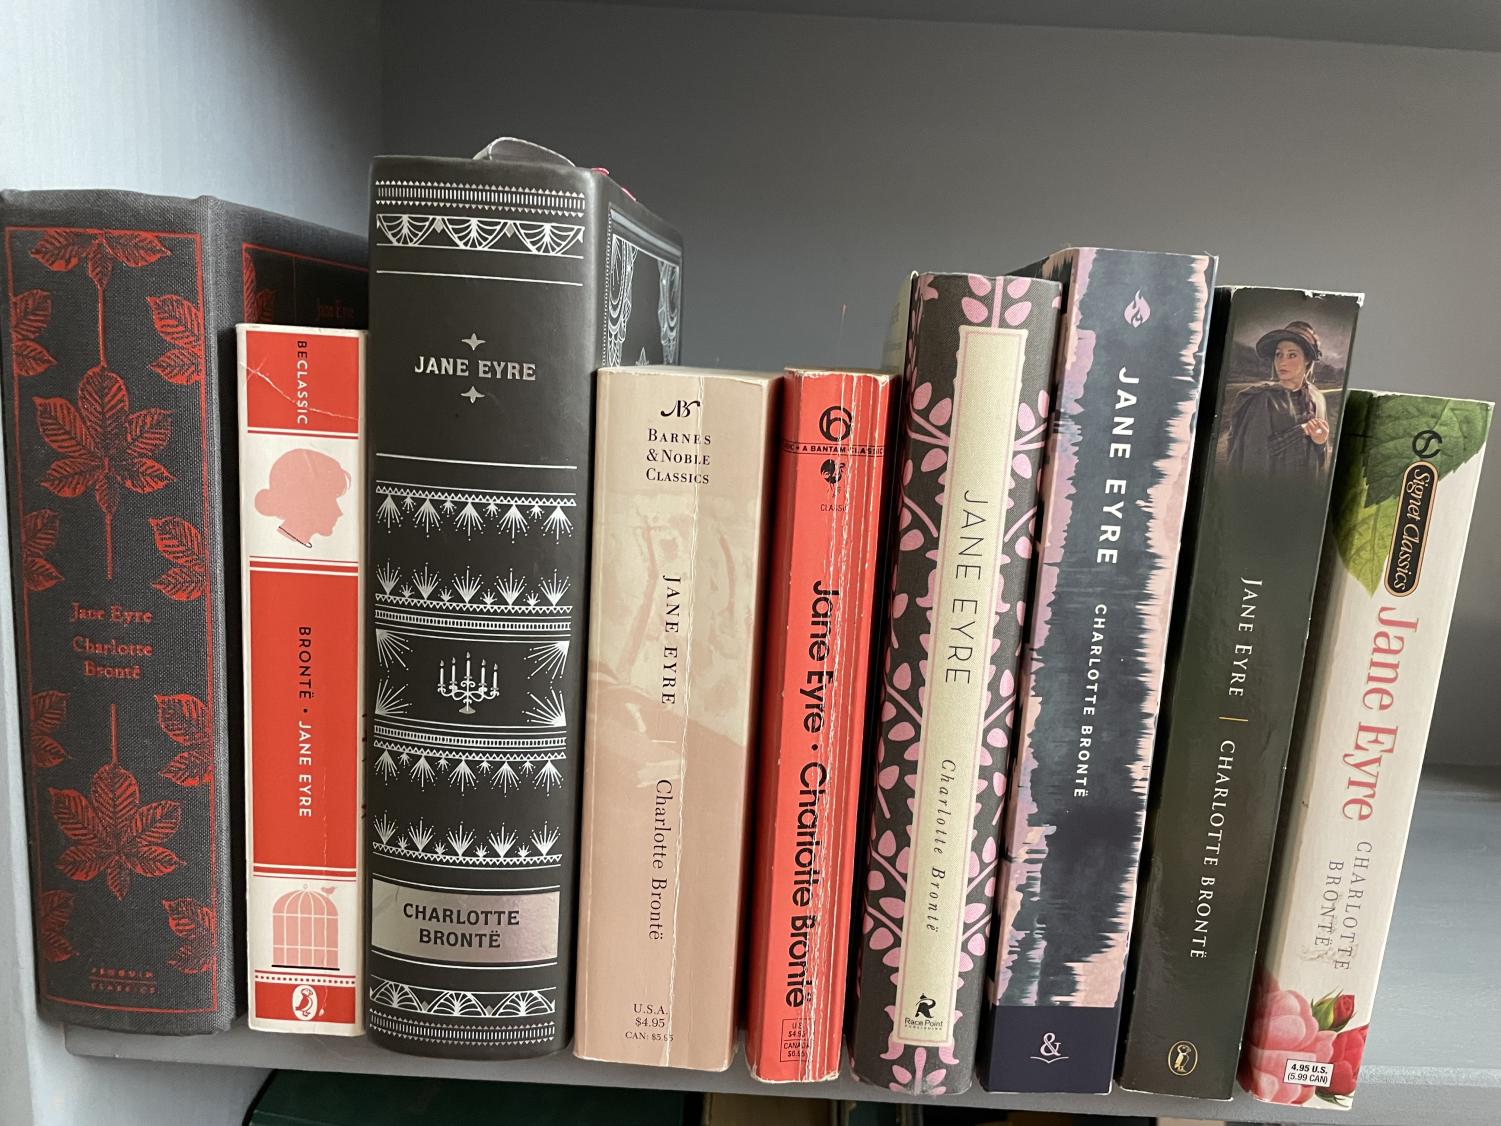 The more the merrier! This shelf displays just a few of my many copies of my all time favorite novel Jane Eyre. I read the novel a few years ago and have since fallen in love with it in every way.